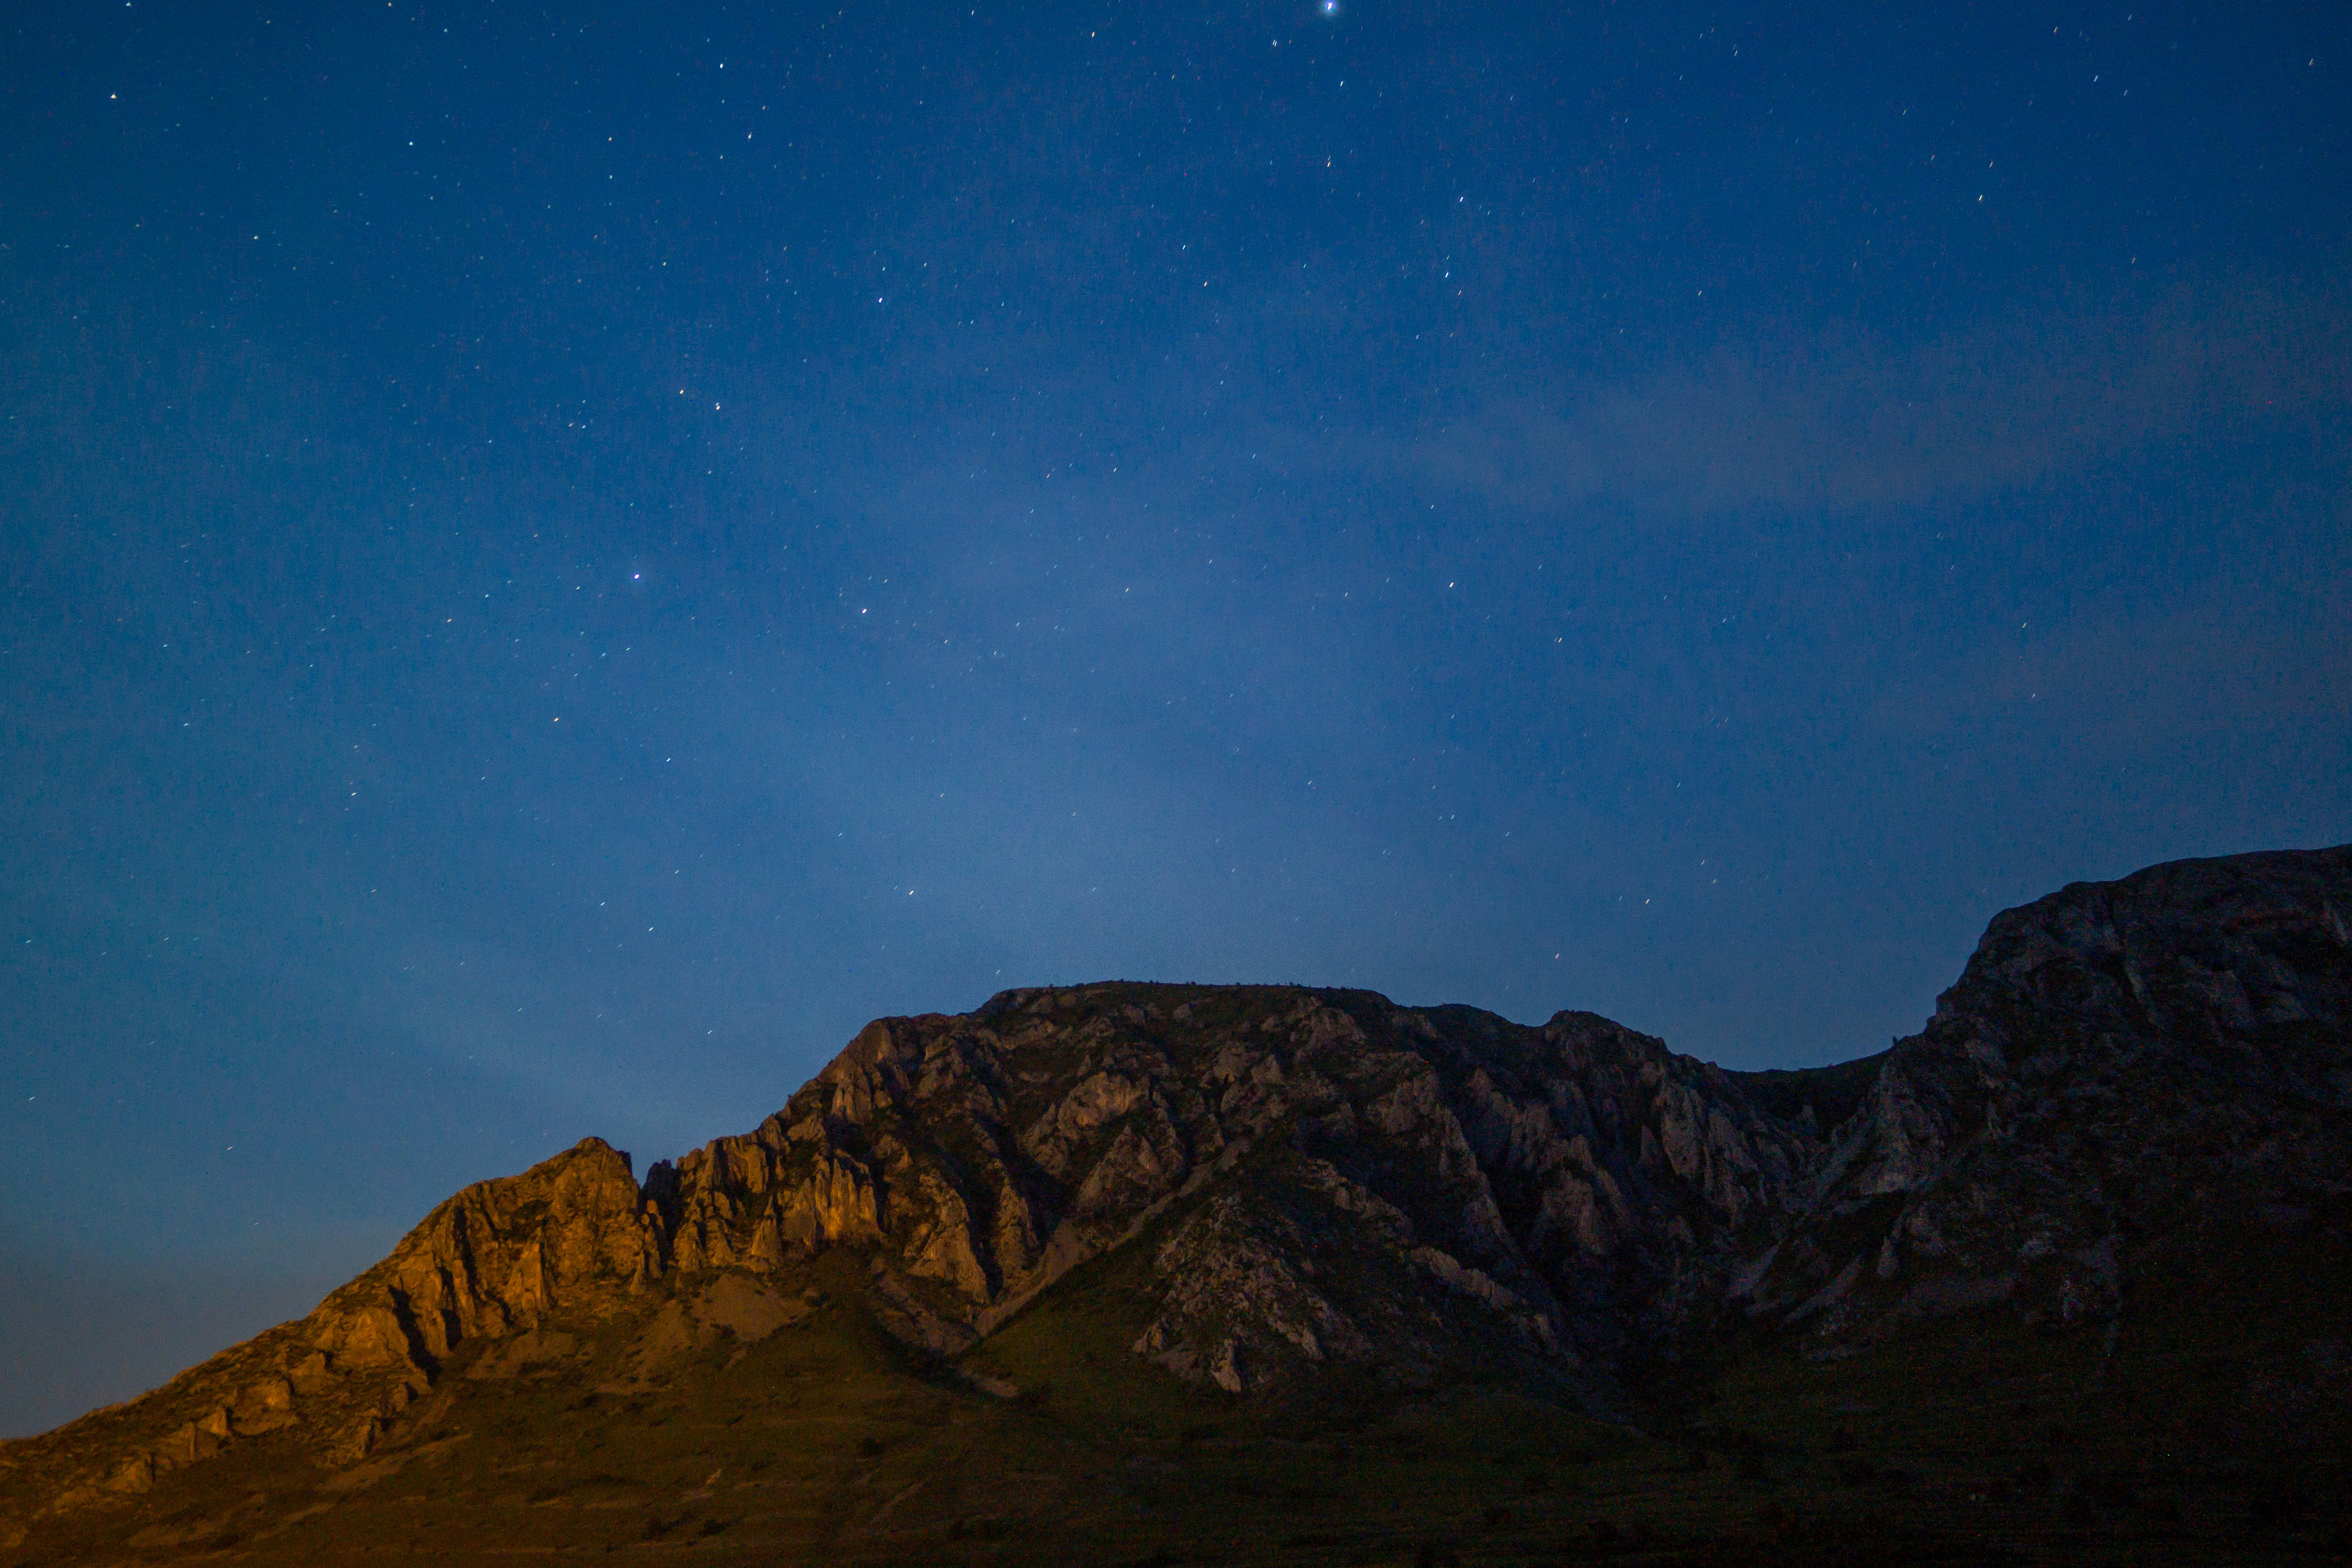 This photo is a 30 second exposure. It was taken at night, under completely dark sky. The left side of the mountain is lit by the lights of the village of Torockó. The mountain is situated in Erdély. I took this picture on my holiday as one of my first astrophoto attempts. Torockó is a beautiful Hungarian village and the locals are very kind and welcoming.